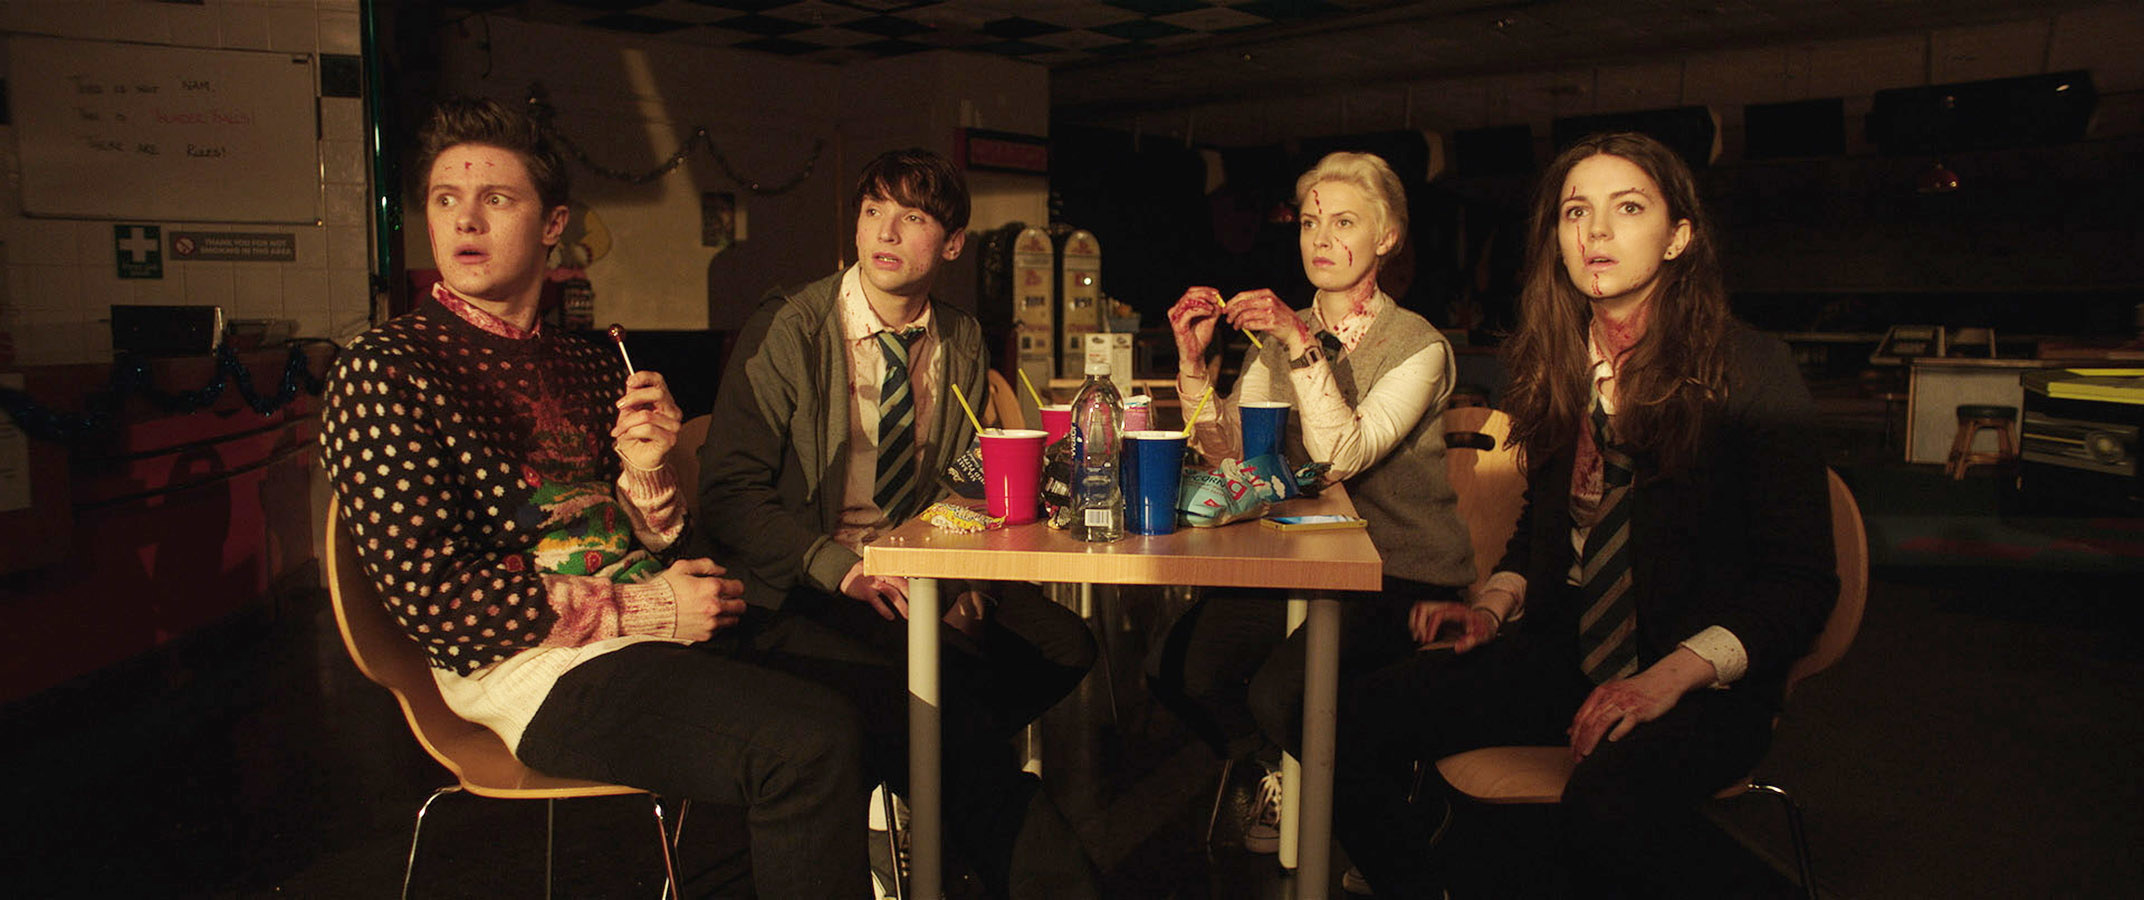 John (Malcolm Cumming), Chris (Christopher Leveaux), Steph (Sarah Swire) and Anna (Ella Hunt) in &quot;Anna and the Apocalypse&quot;